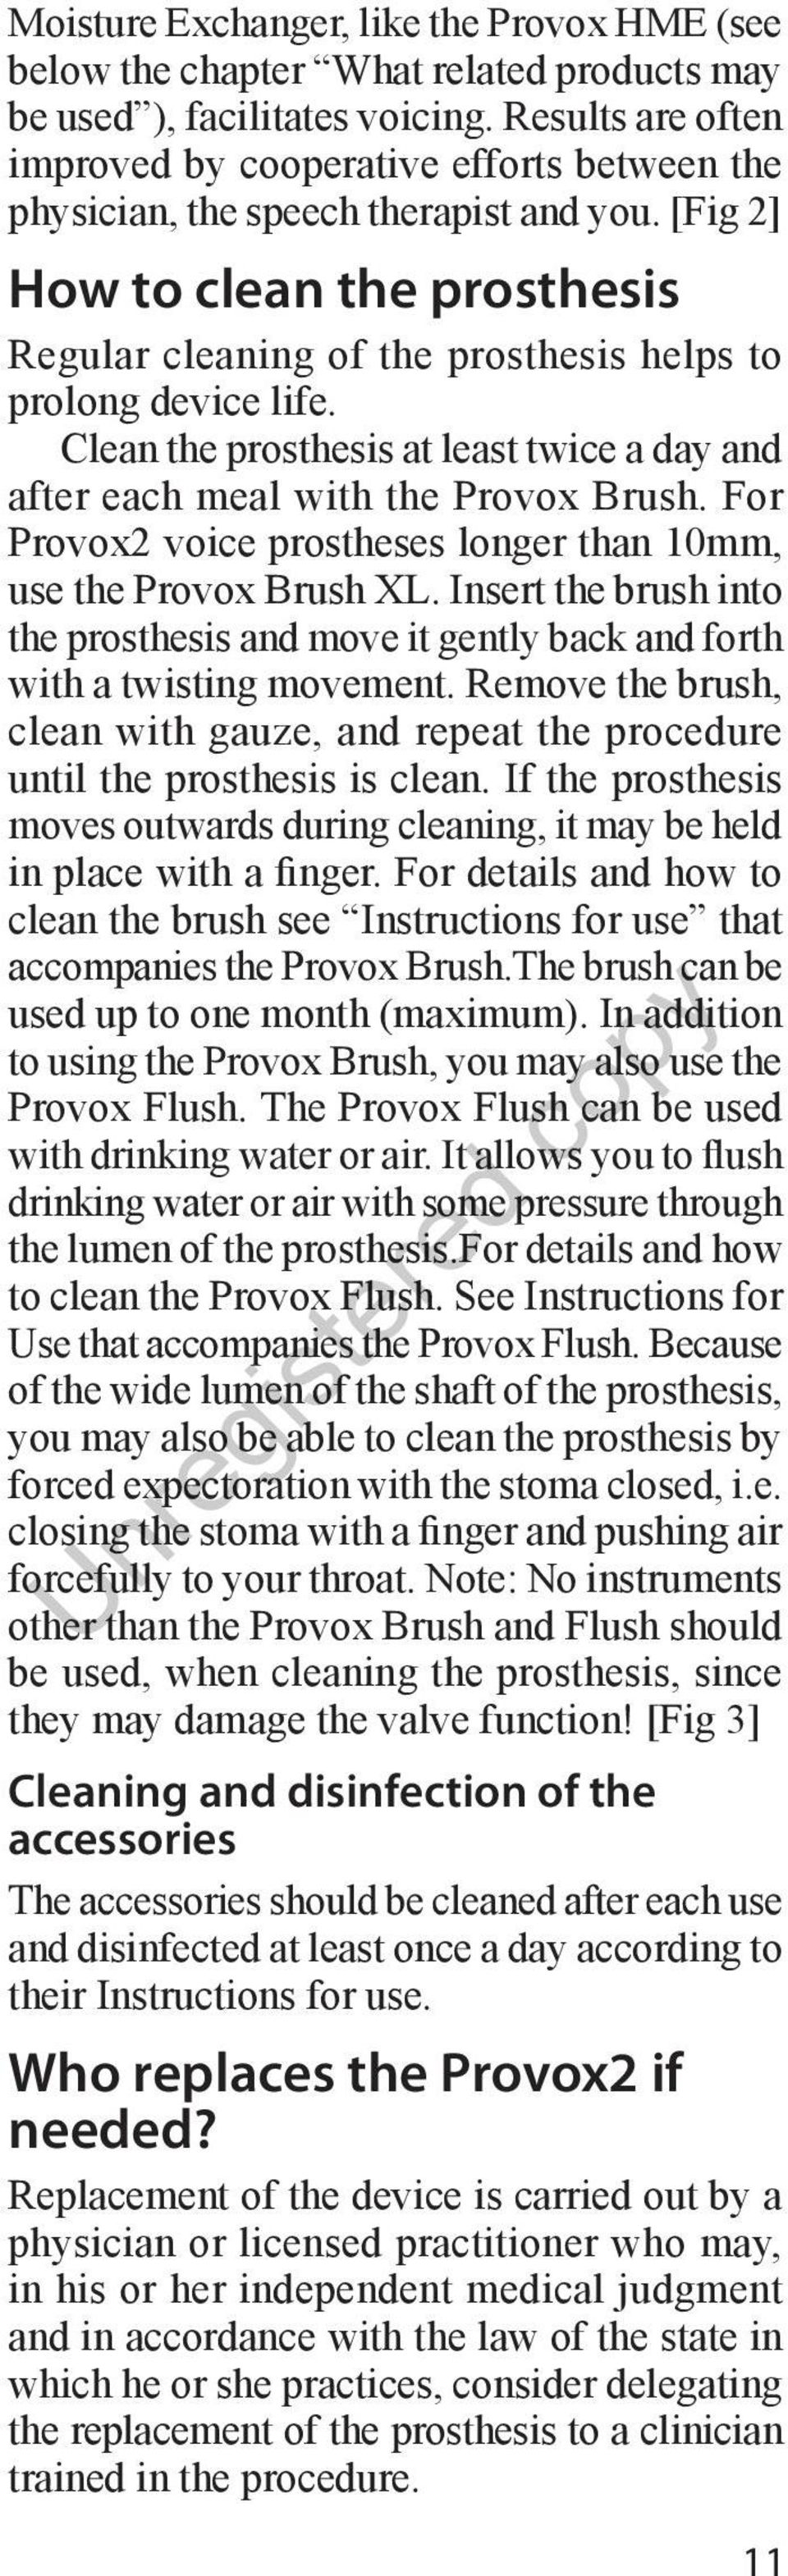 [Fig 2] How to clean the prosthesis Regular cleaning of the prosthesis helps to prolong device life. Clean the prosthesis at least twice a day and after each meal with the Provox Brush.